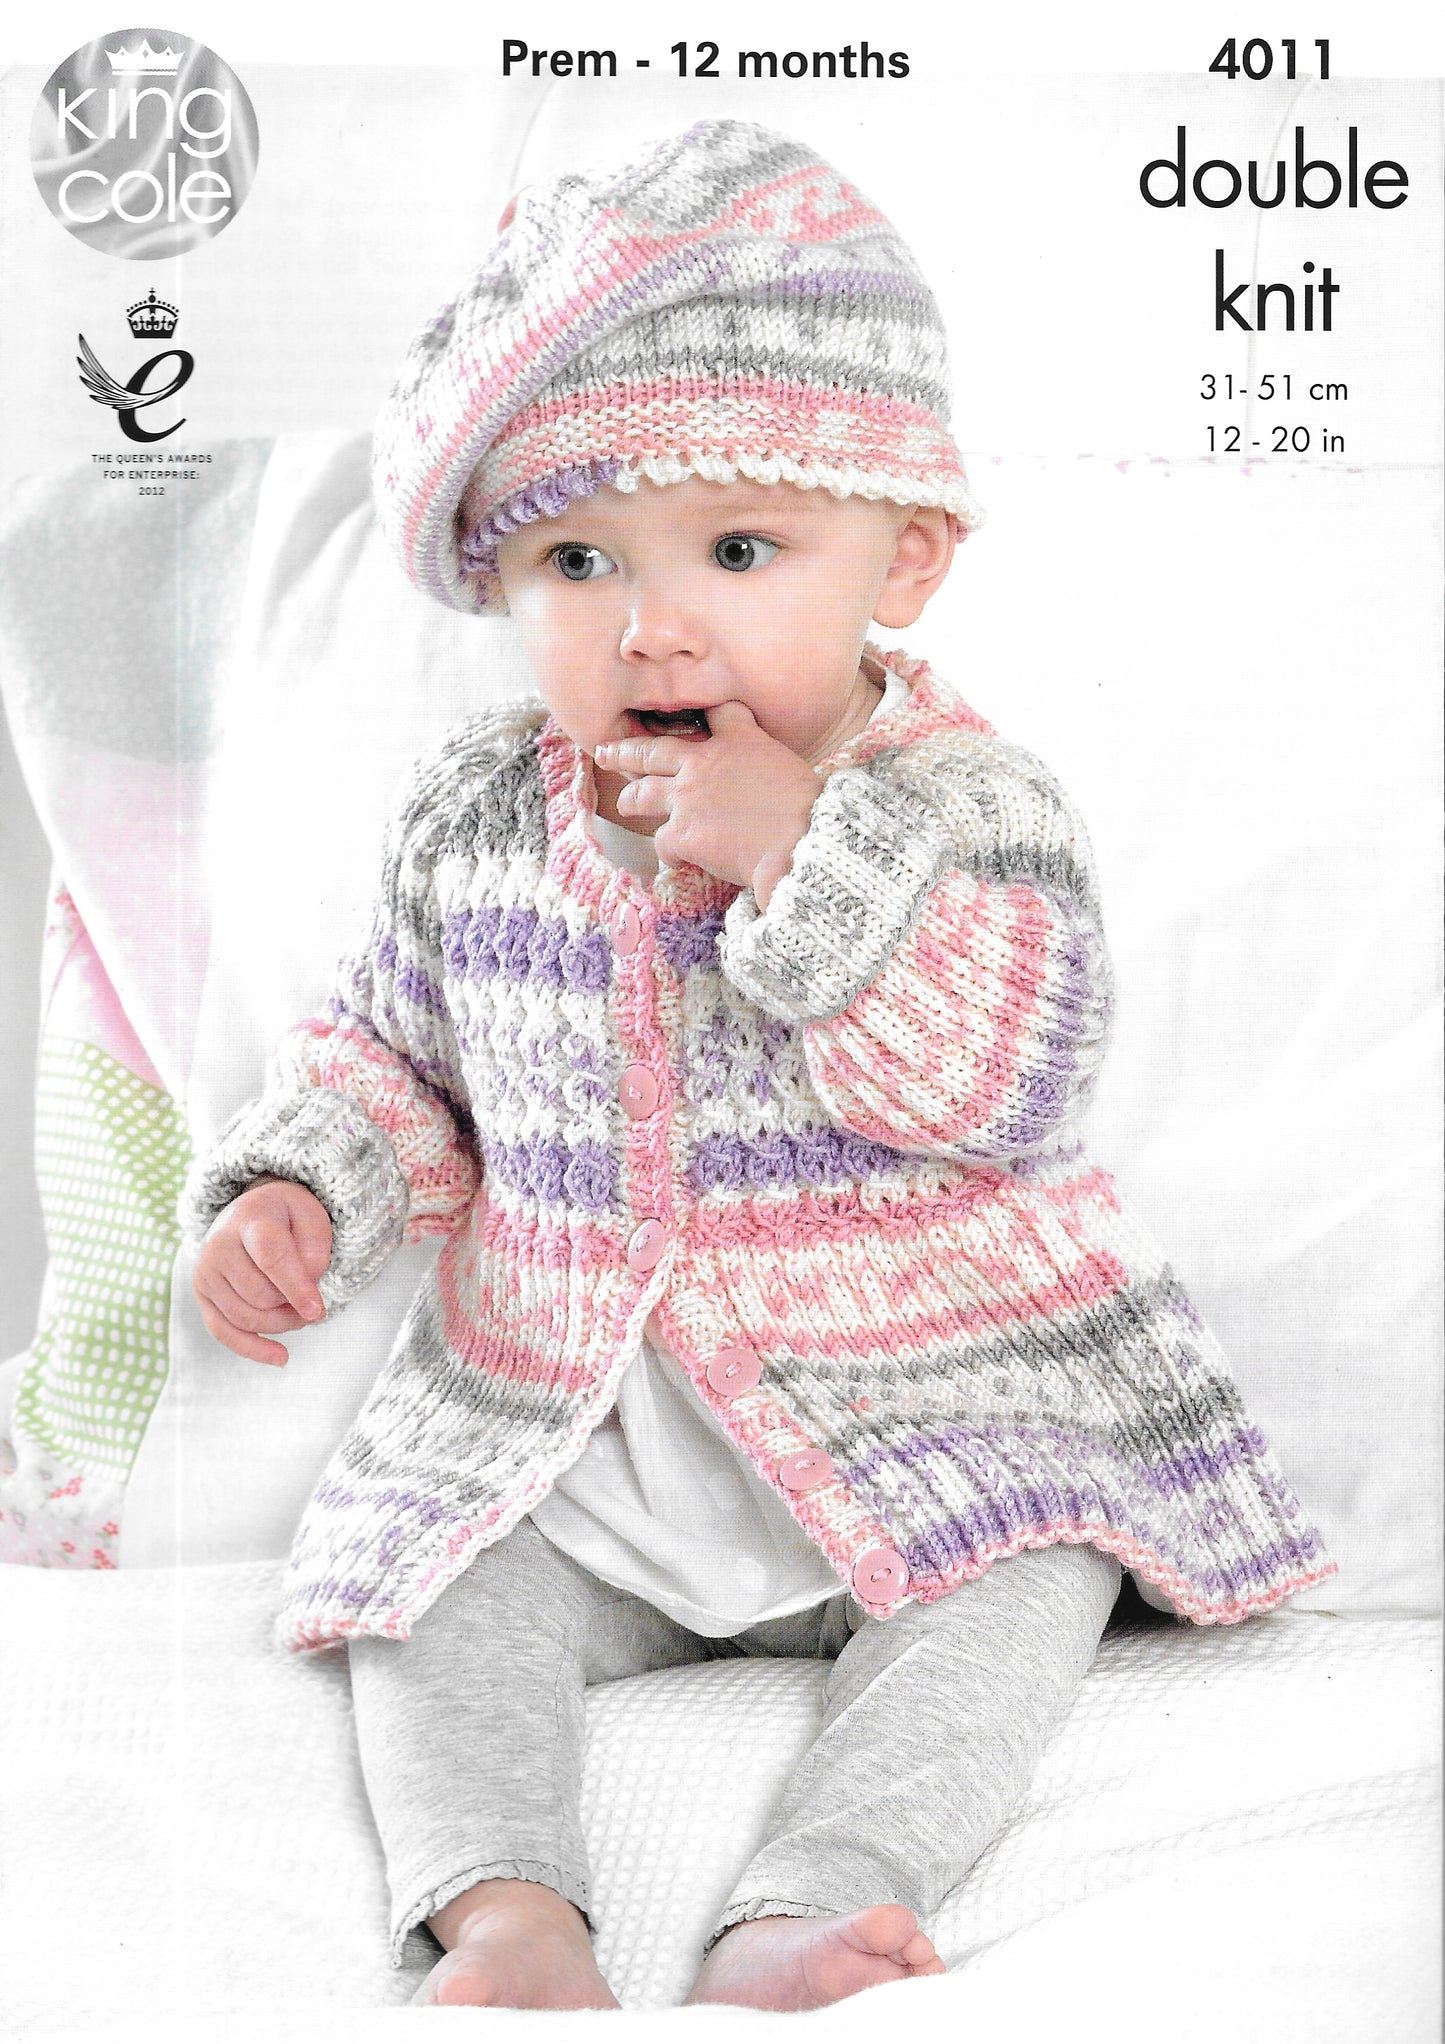 4011 King Cole Knitting Pattern. Top/Cardigan/Leggings/Hat/Beret/Mittens. Double Knit